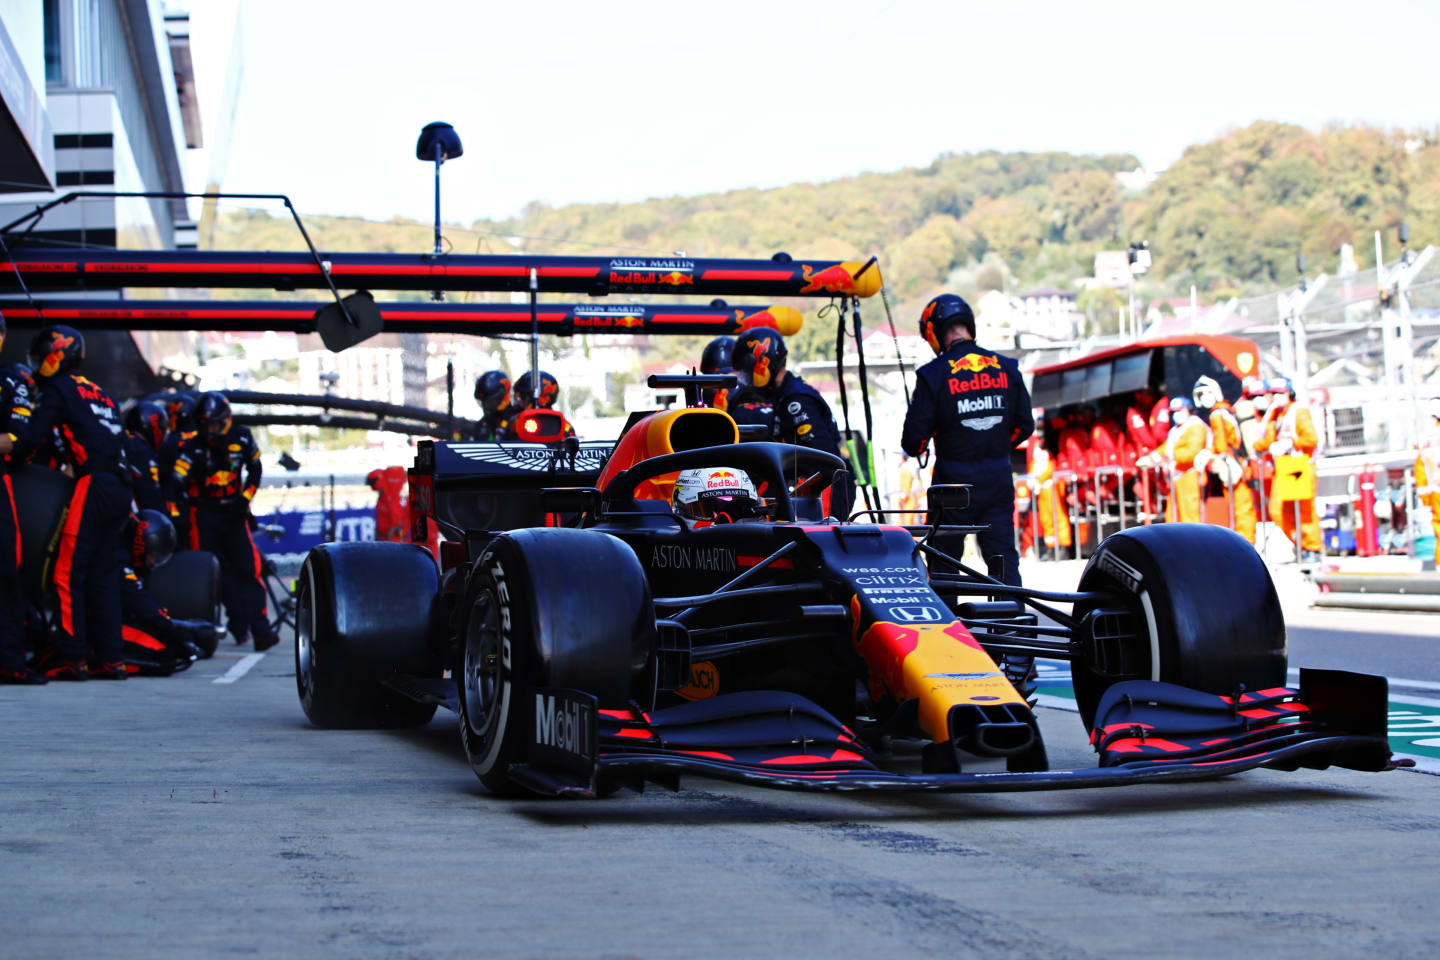 SOCHI, RUSSIA - SEPTEMBER 27: Max Verstappen of the Netherlands driving the (33) Aston Martin Red Bull Racing RB16 makes a pitstop during the F1 Grand Prix of Russia at Sochi Autodrom on September 27, 2020 in Sochi, Russia. (Photo by Mark Thompson/Getty Images)